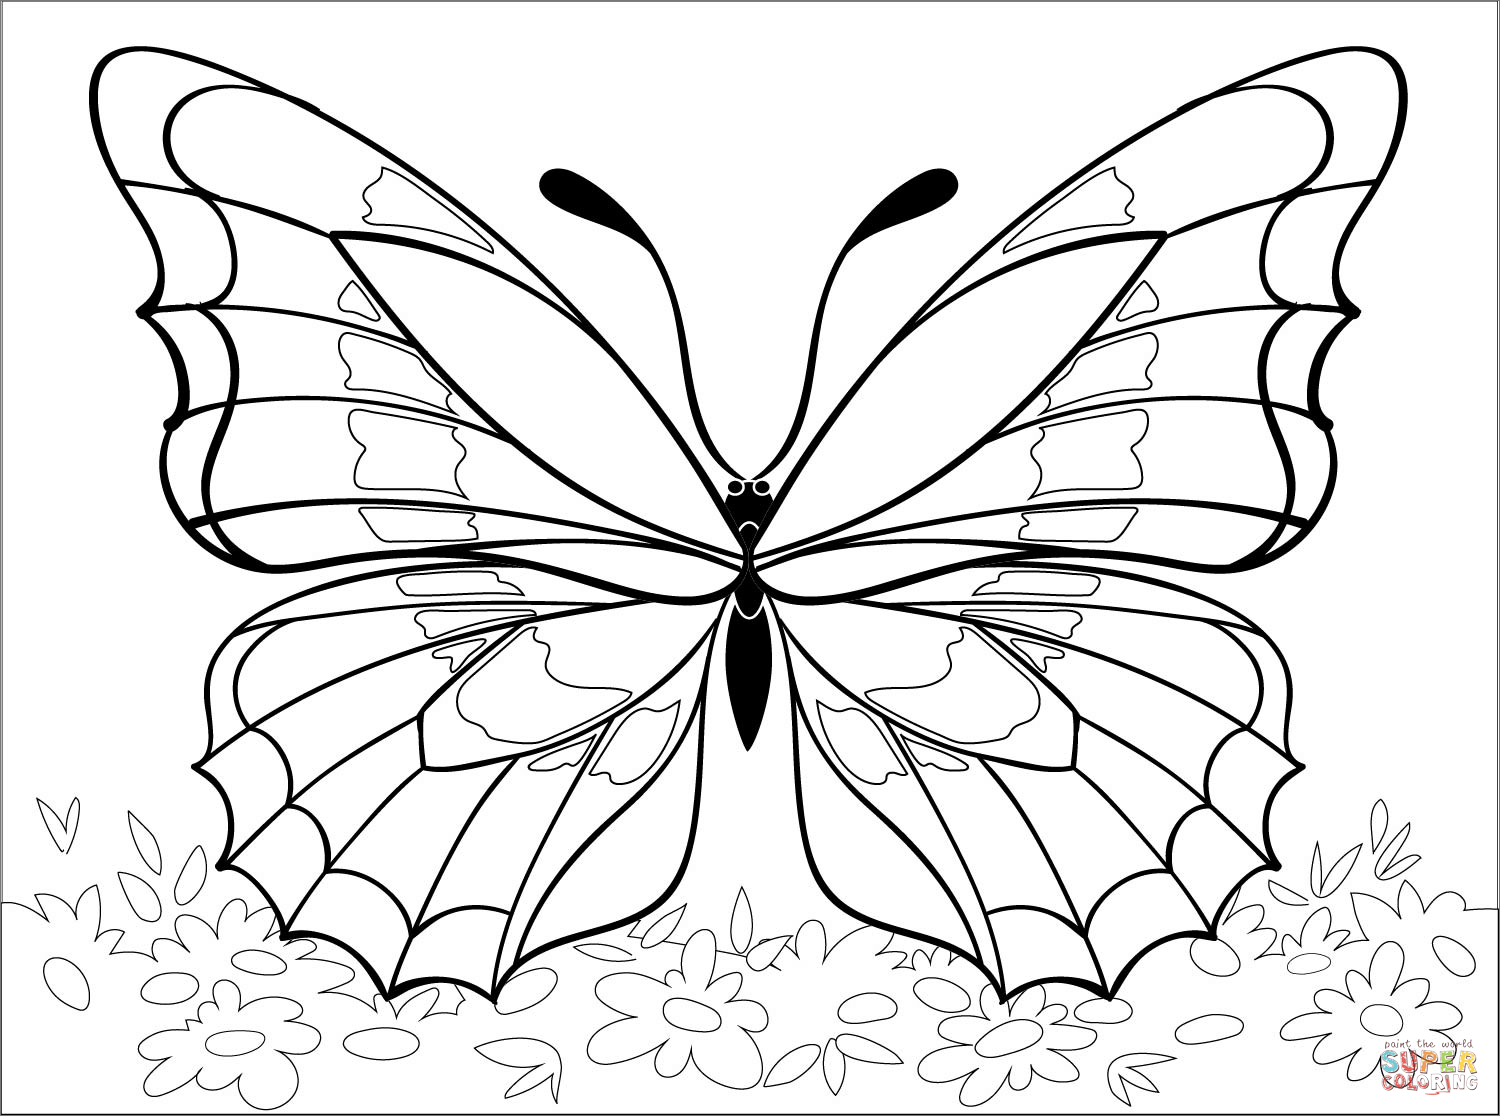 Butterfly coloring page | Free Printable Coloring Pages